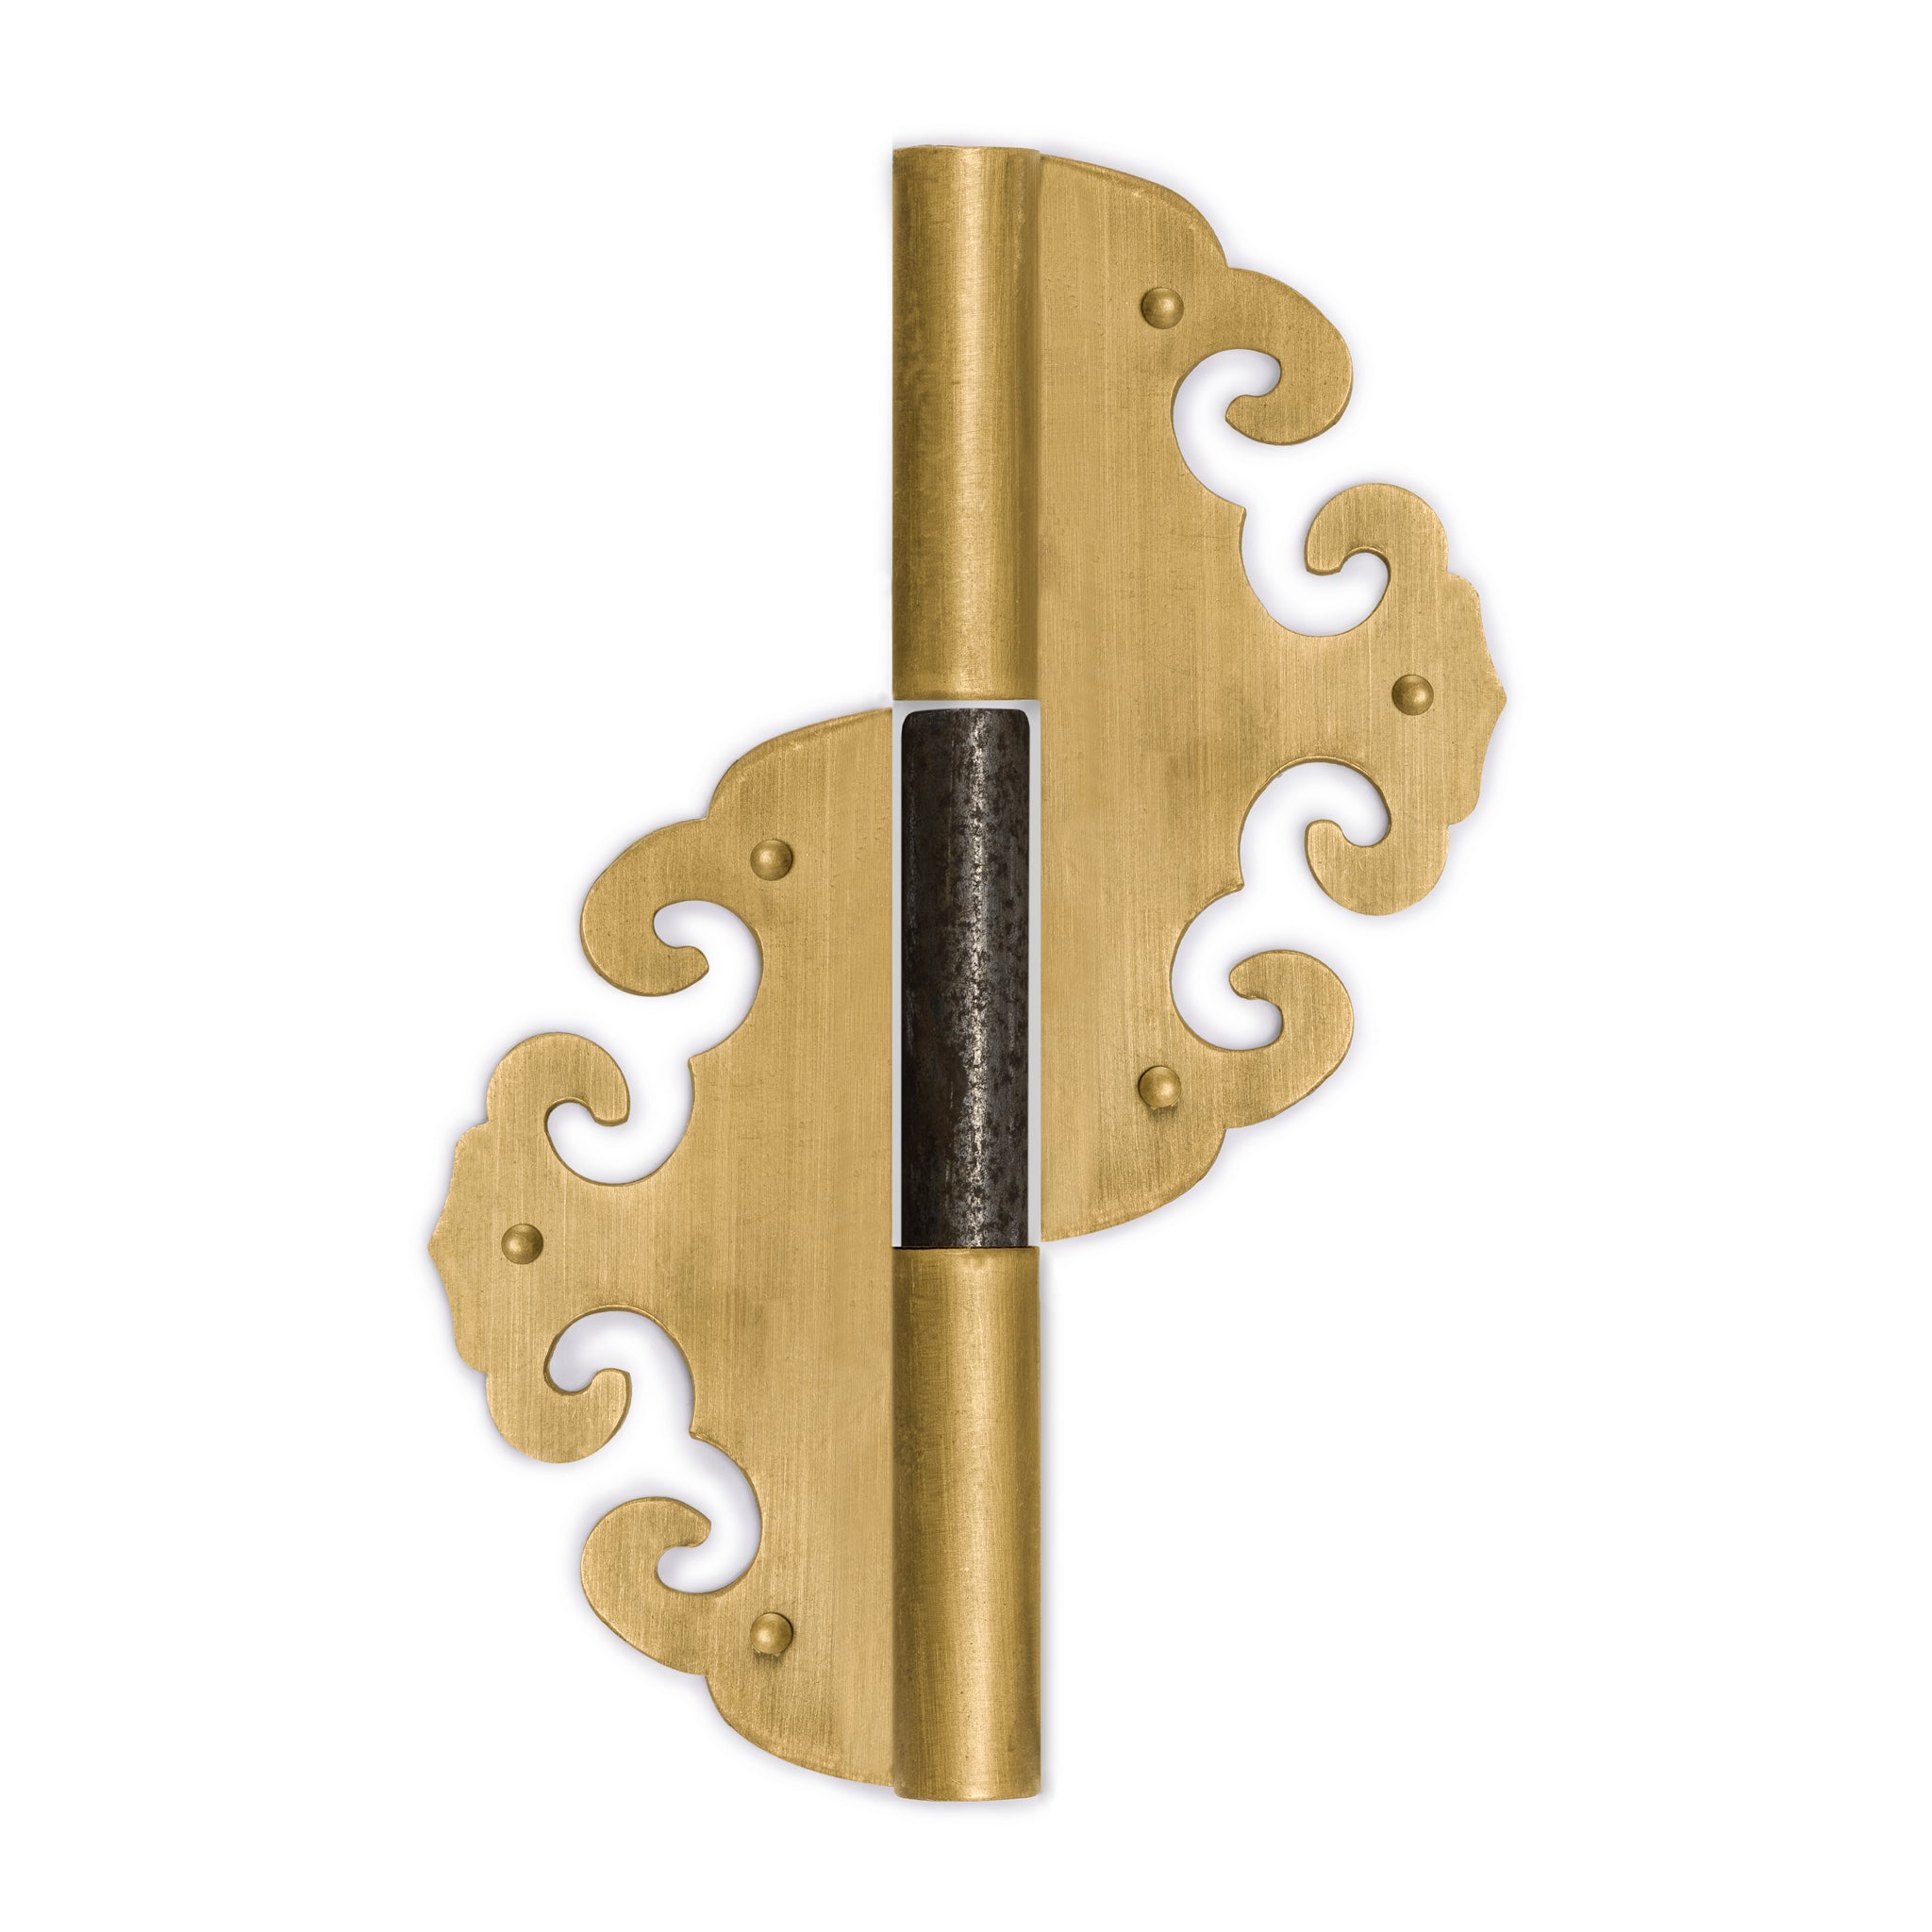 Four Flowers Hinges 3.1" x 3.1" - Set of 2-Chinese Brass Hardware